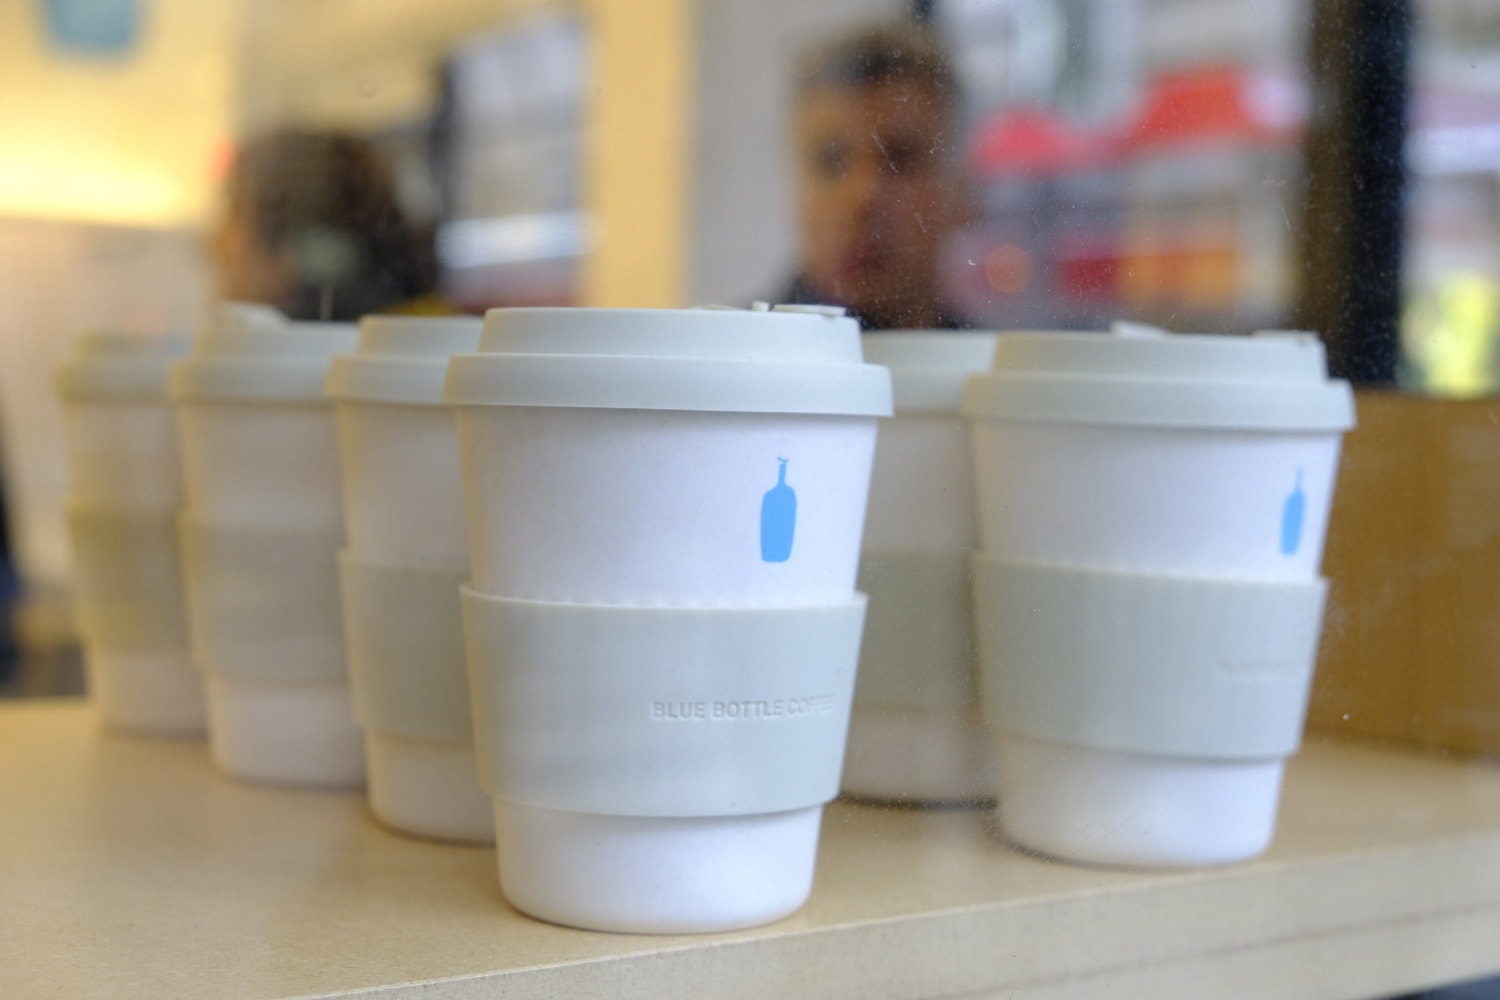 Growing number of San Francisco cafes banishing disposable coffee cups